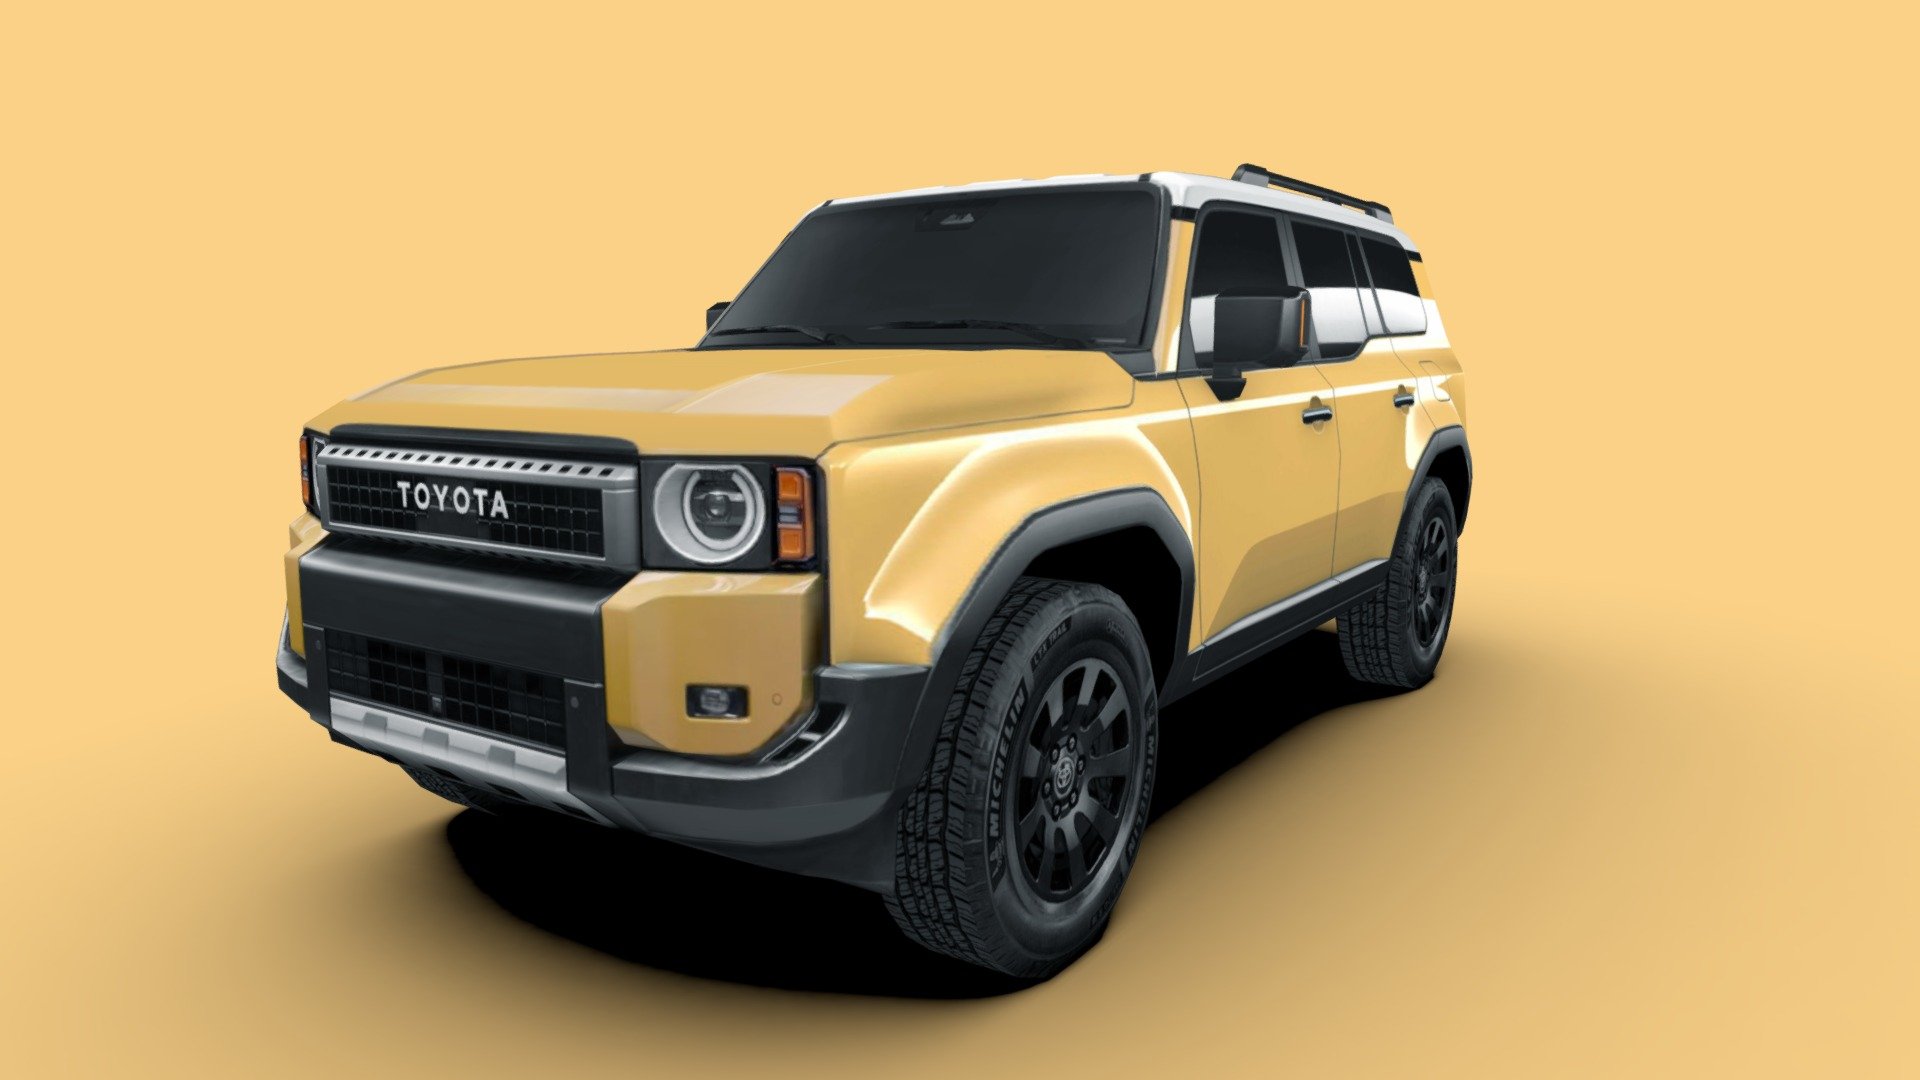 3d model of the 2025 Toyota Land Cruiser 250, or Prado, a full-size, four-wheel drive SUV

The model is very low-poly, full-scale, real photos texture (single 2048 x 2048 png).

Package includes 5 file formats and texture (3ds, fbx, dae, obj and skp)

Hope you enjoy it.

José Bronze - Toyota Land Cruiser 2025 - Buy Royalty Free 3D model by Jose Bronze (@pinceladas3d) 3d model